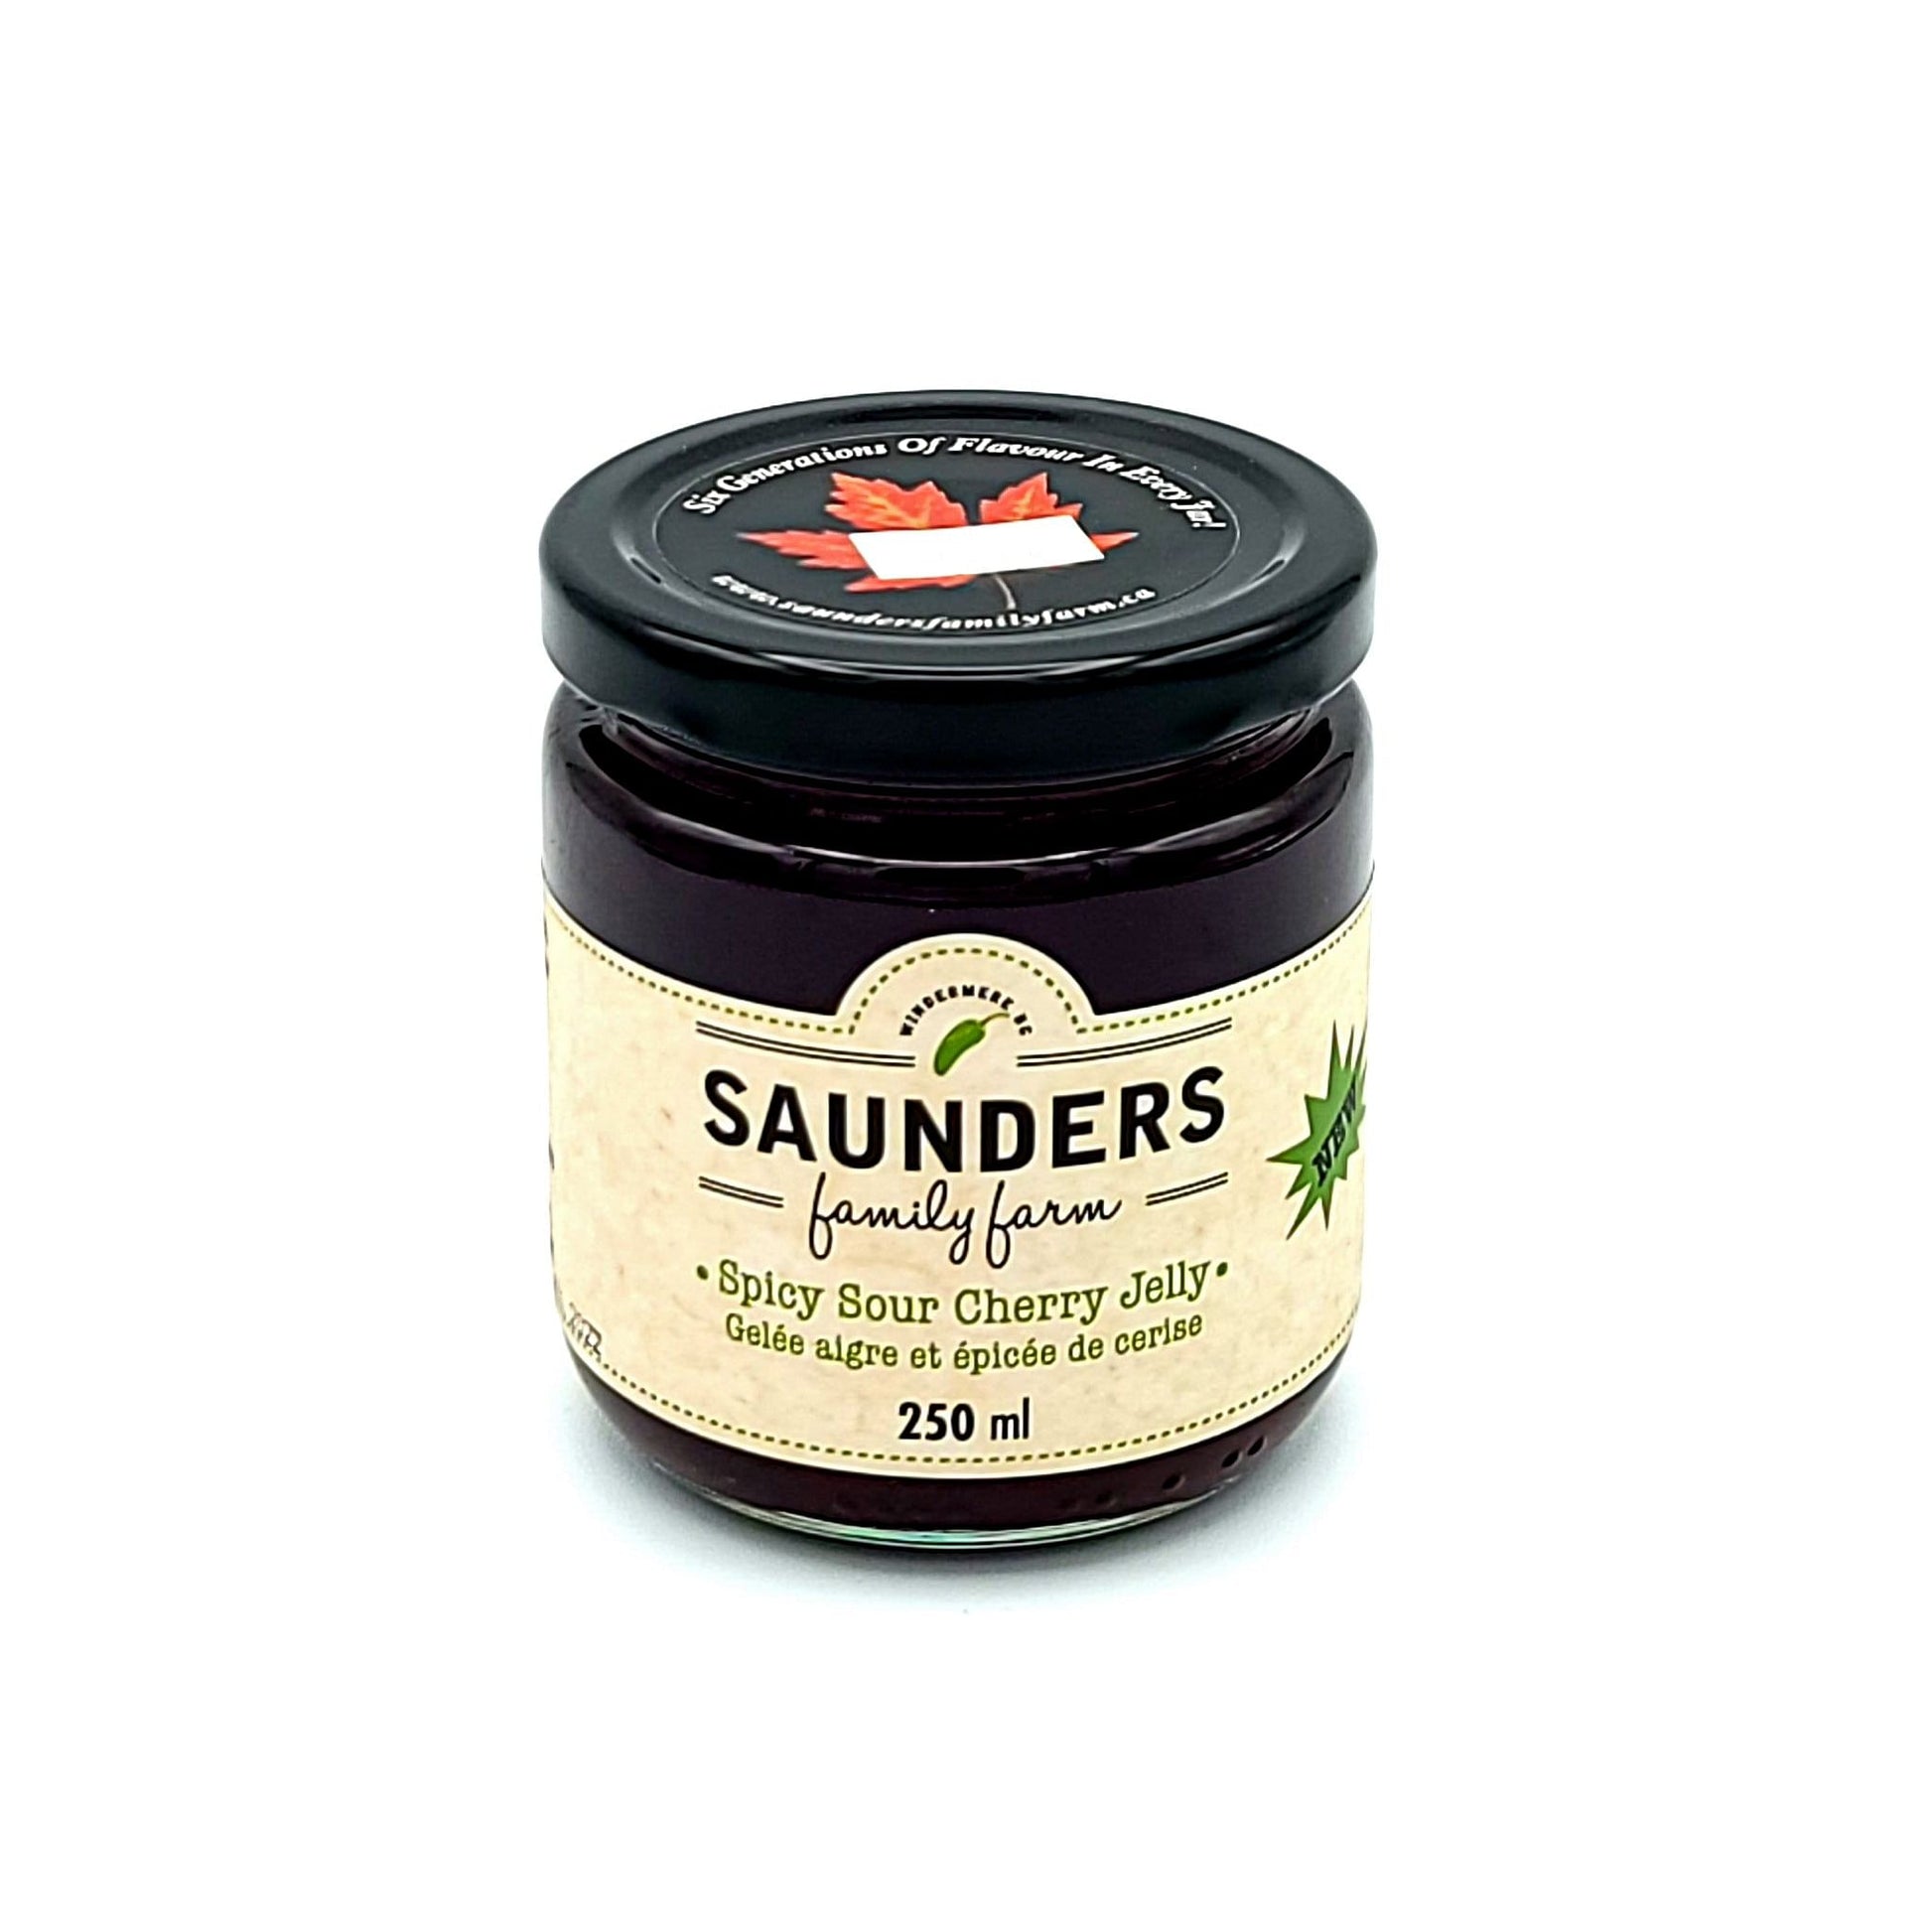 Saunders Family Farm - Spicy Sour Cherry Jelly - Valbella Gourmet Foods